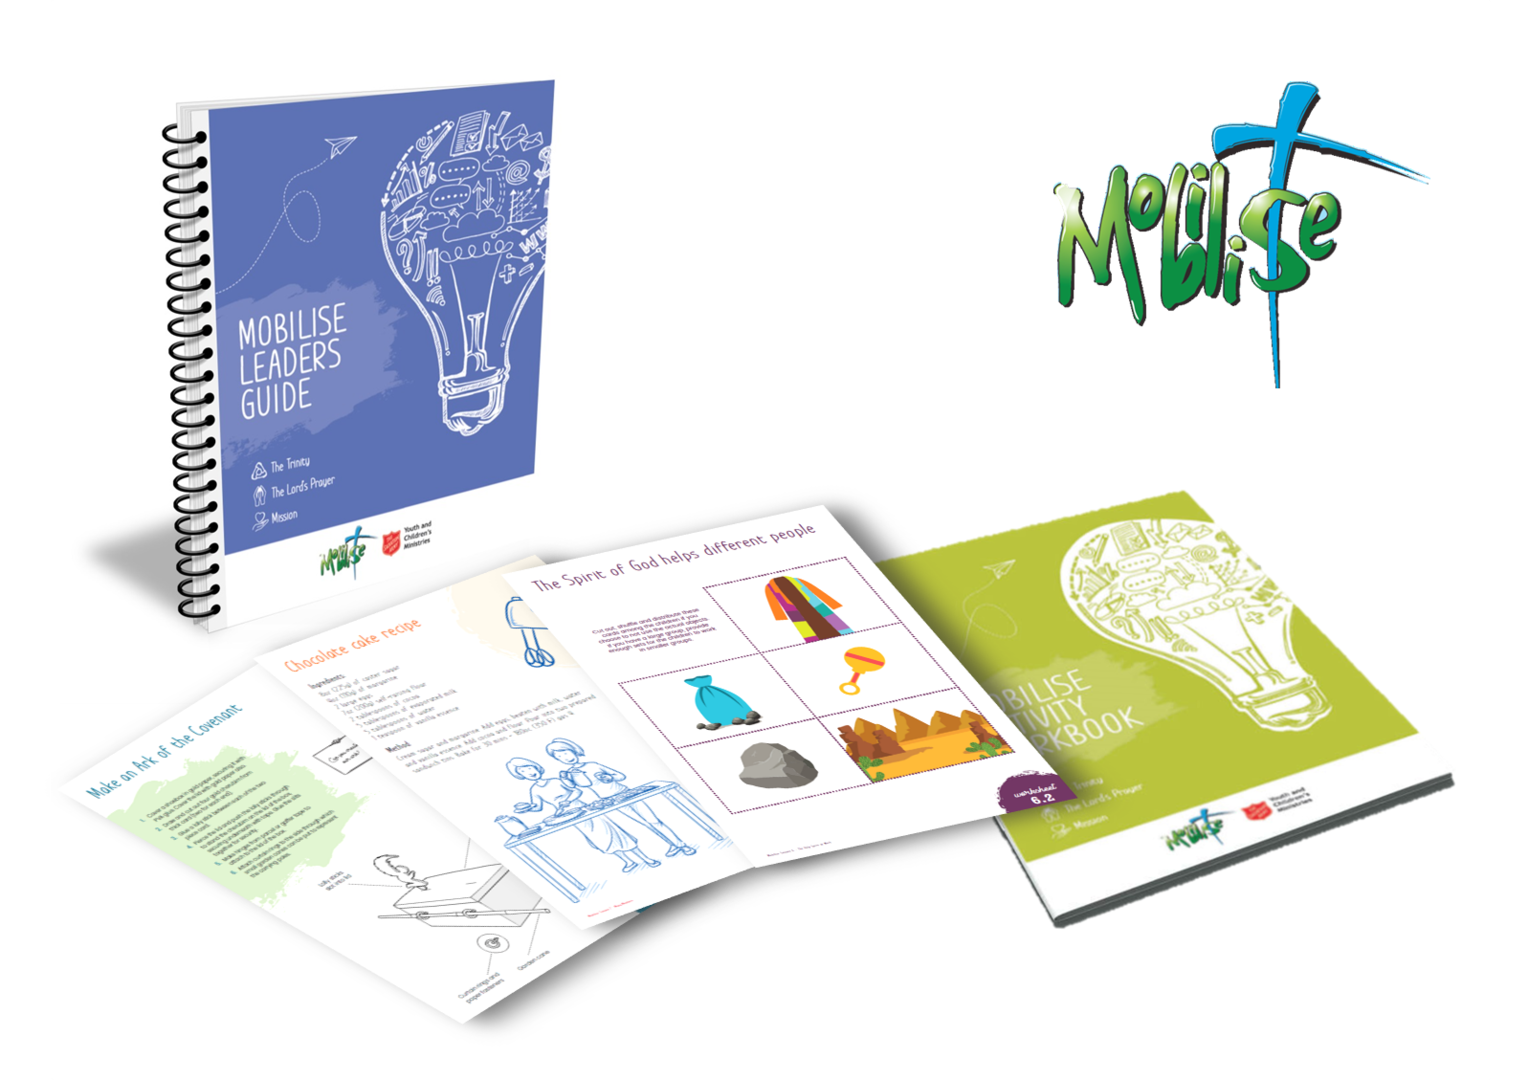 Photograph of the Mobilise Leaders Guide, a selection of worksheets and the Mobilise Activity Workbook